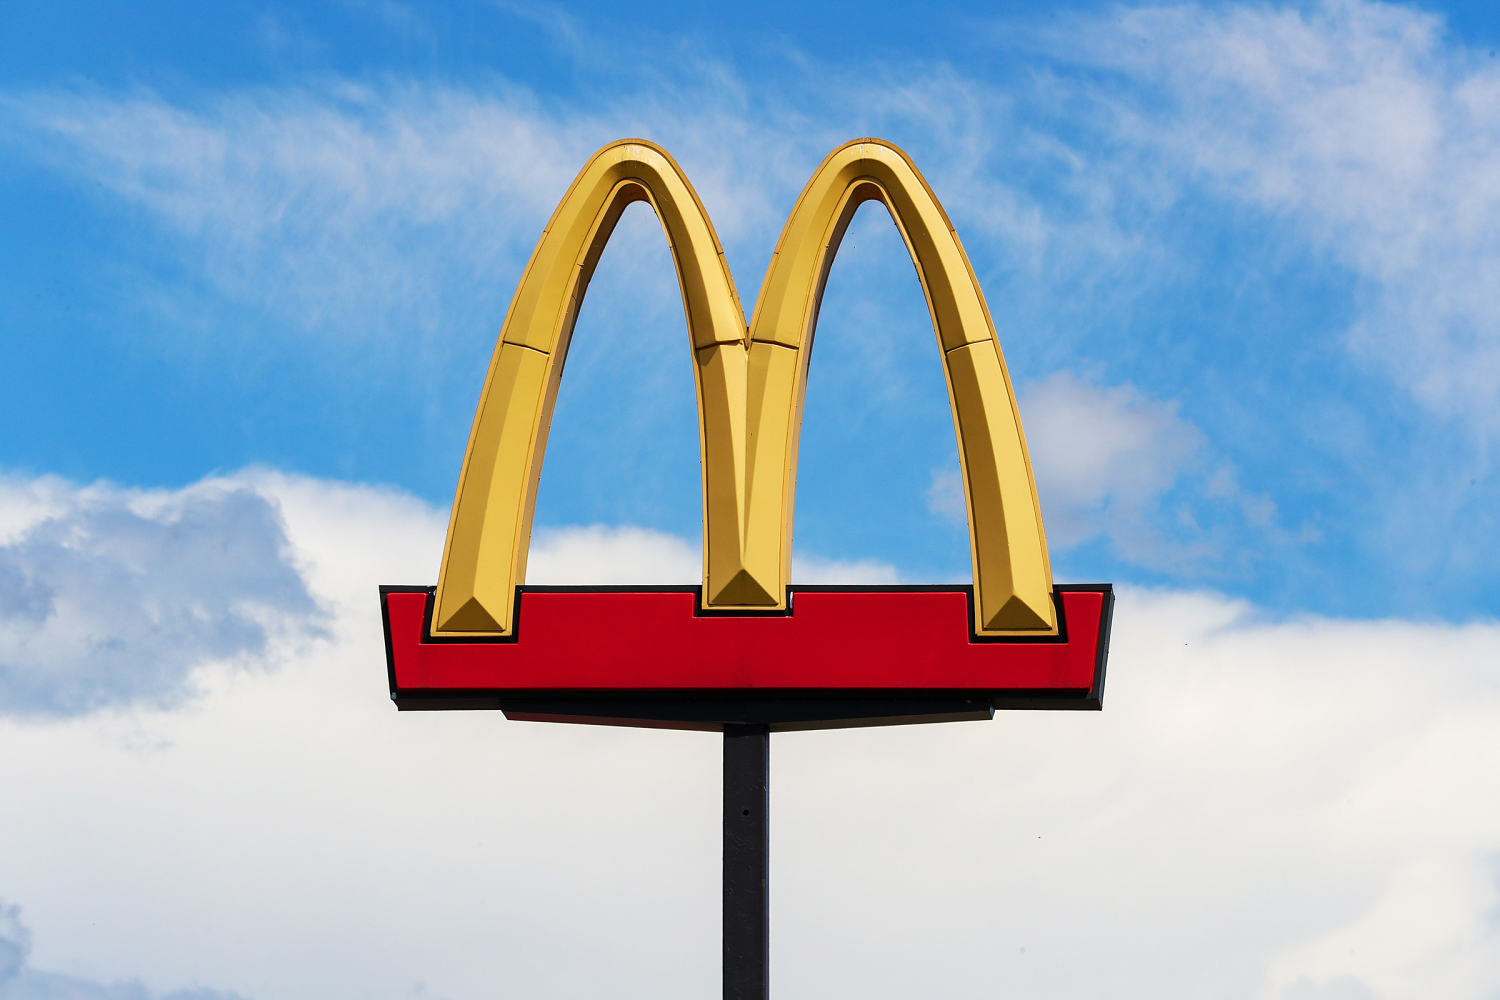 McDonald's to extend $5 value meal in most U.S. markets as diners return to chain